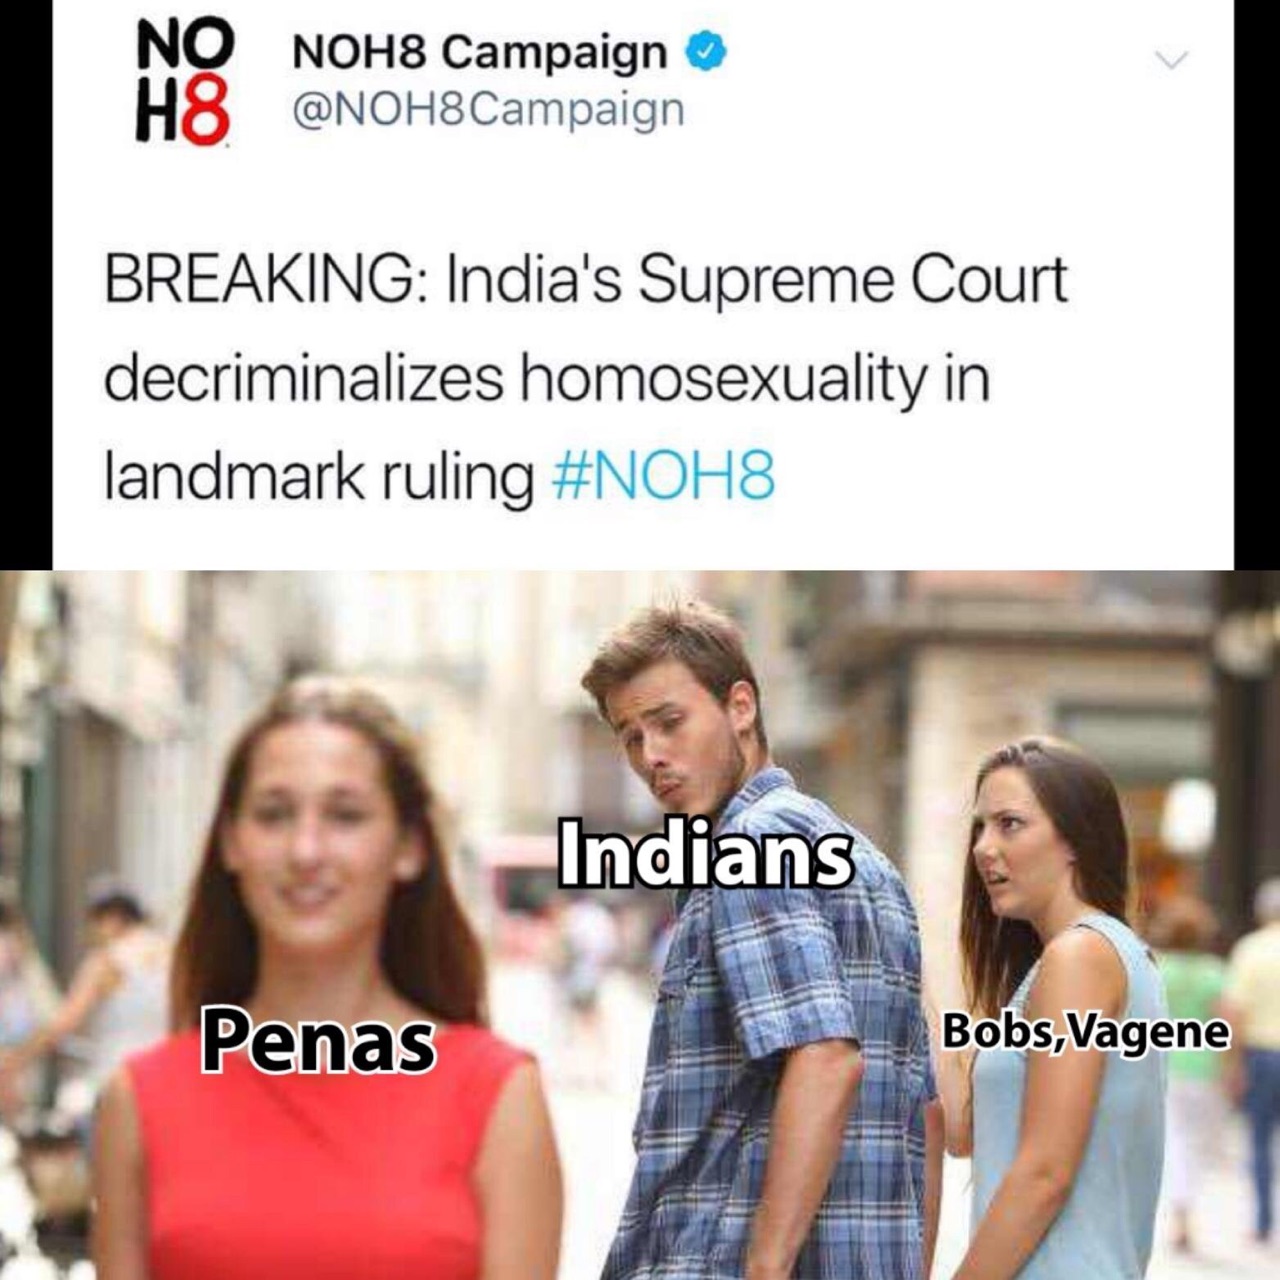 memes - bobs and vagene memes - No NOH8 Campaign H8 Breaking India's Supreme Court decriminalizes homosexuality in landmark ruling Indians Penas Bobs, Vagene